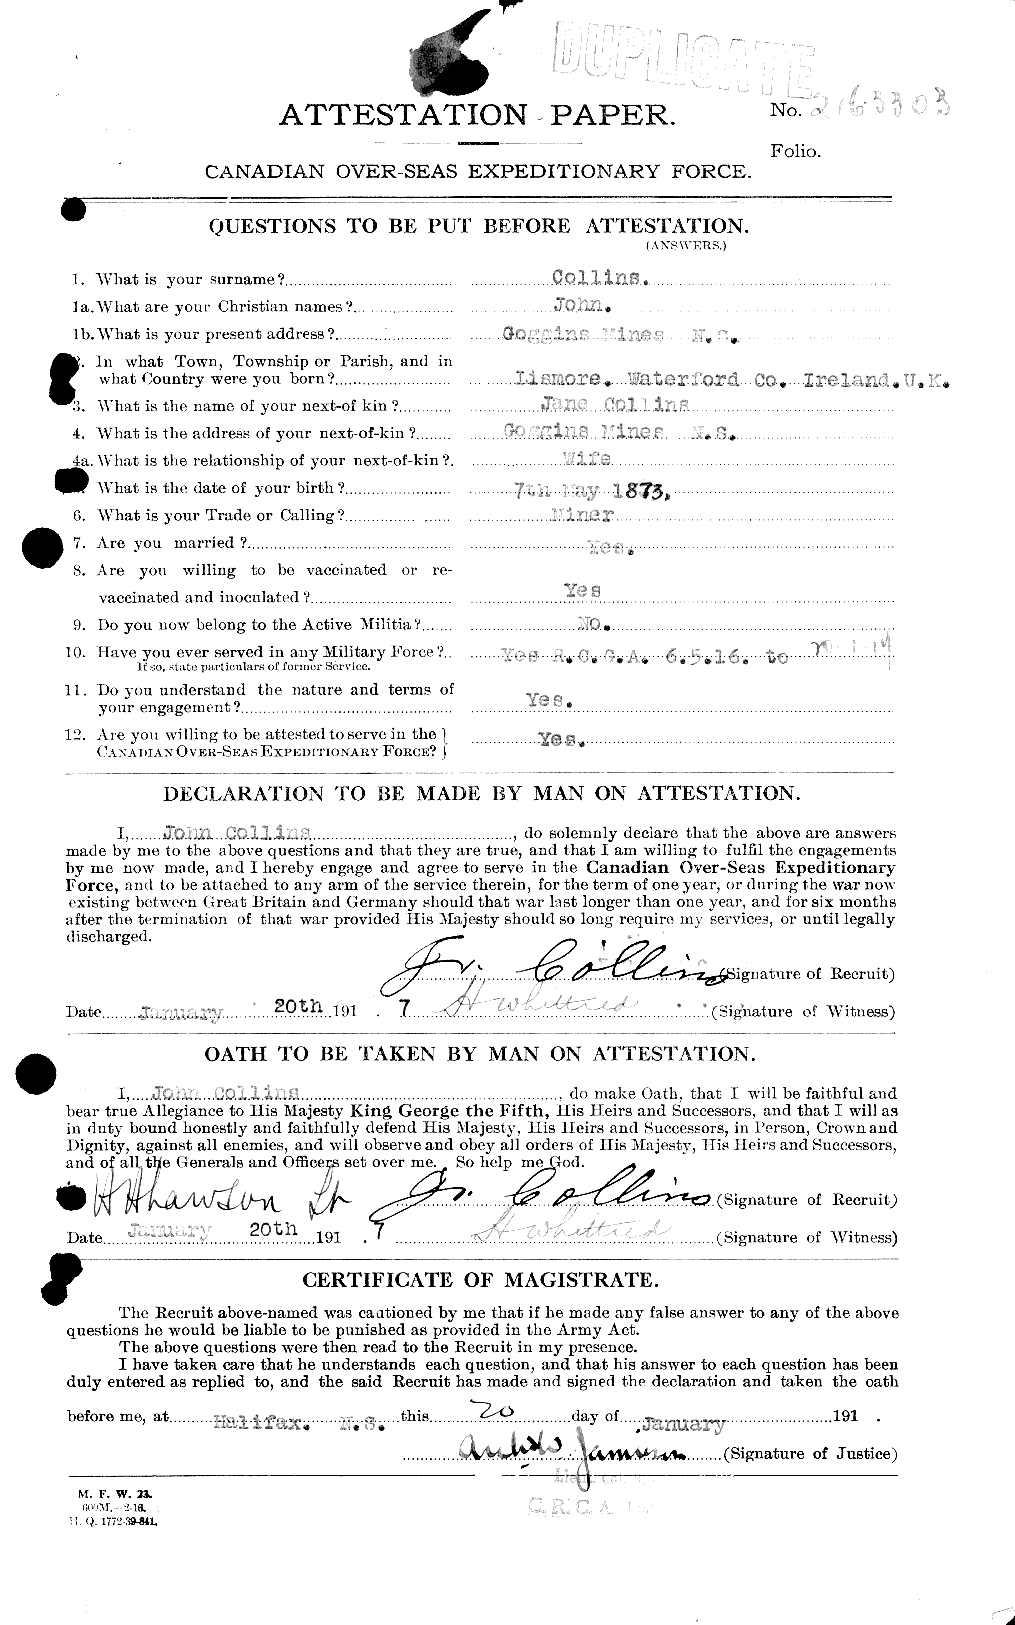 Personnel Records of the First World War - CEF 037993a